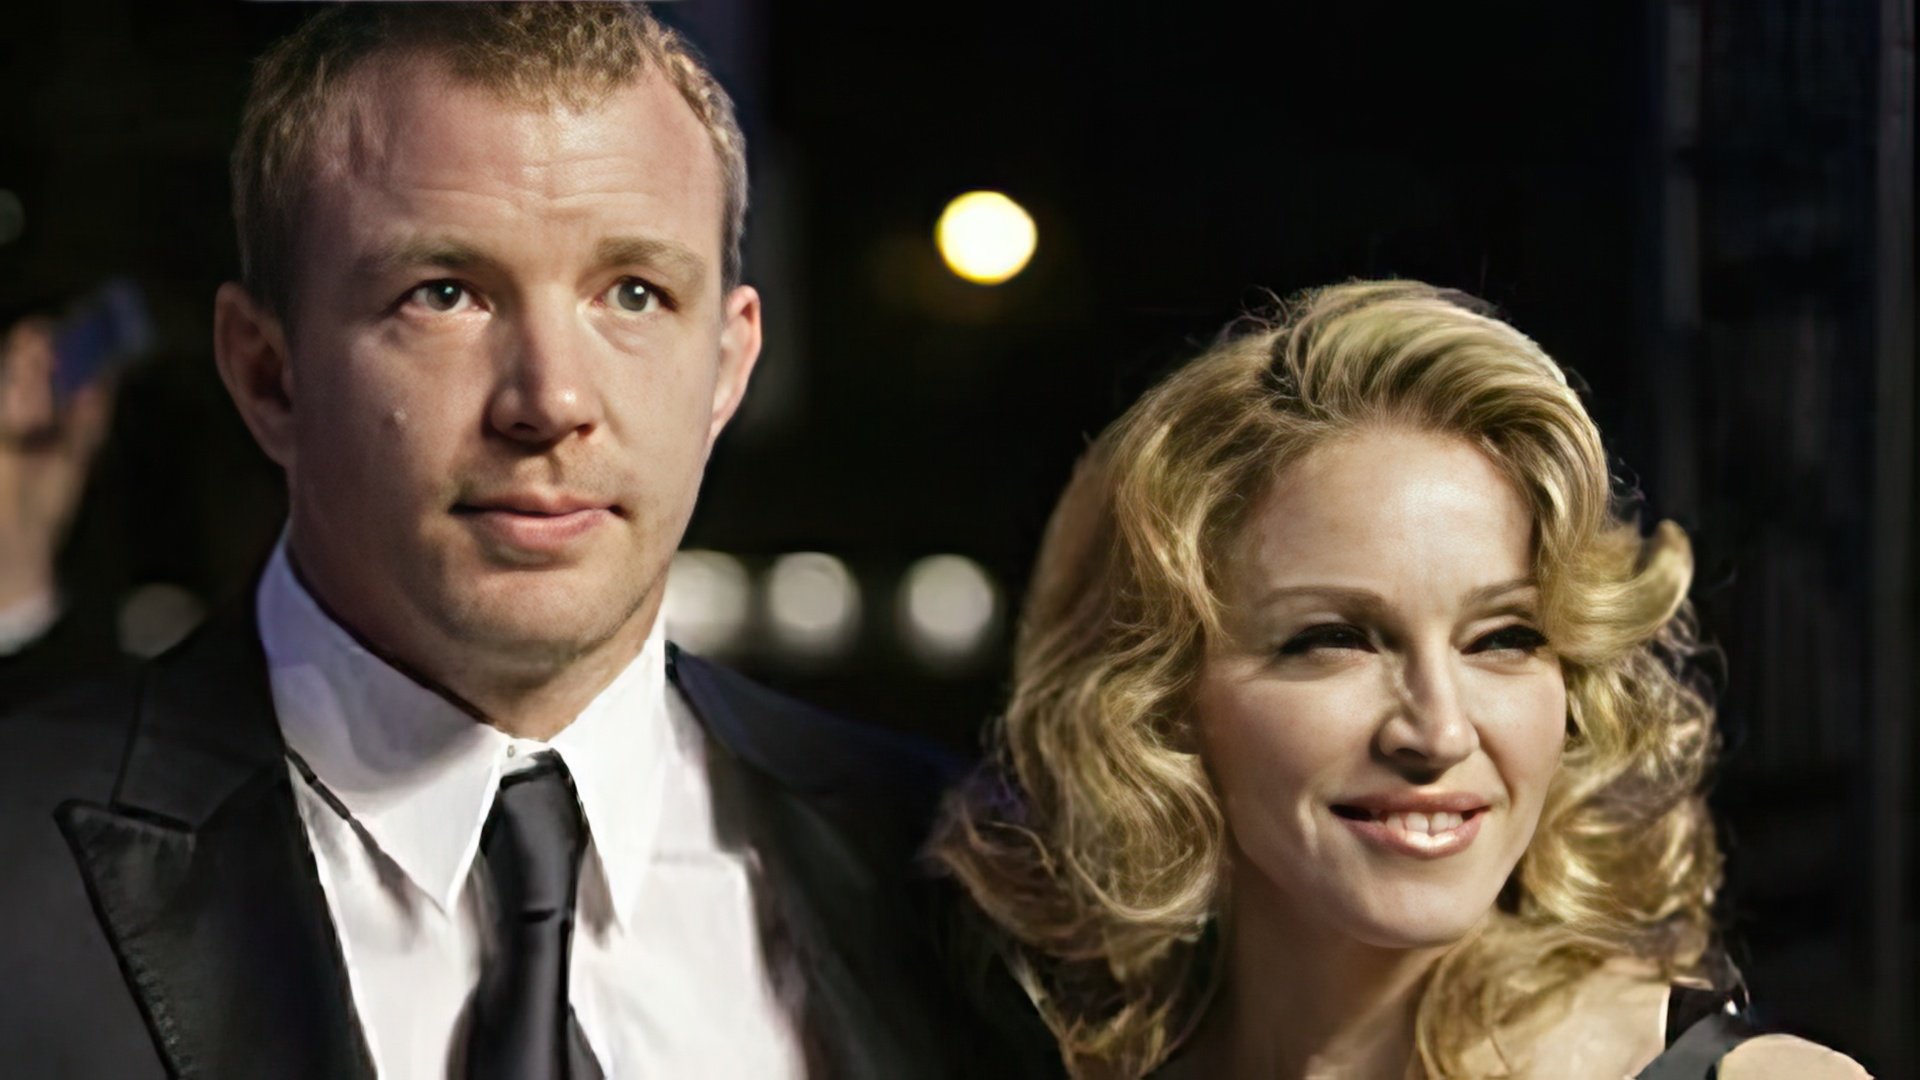 In November 2008 Guy Ritchie and Madonna divorced